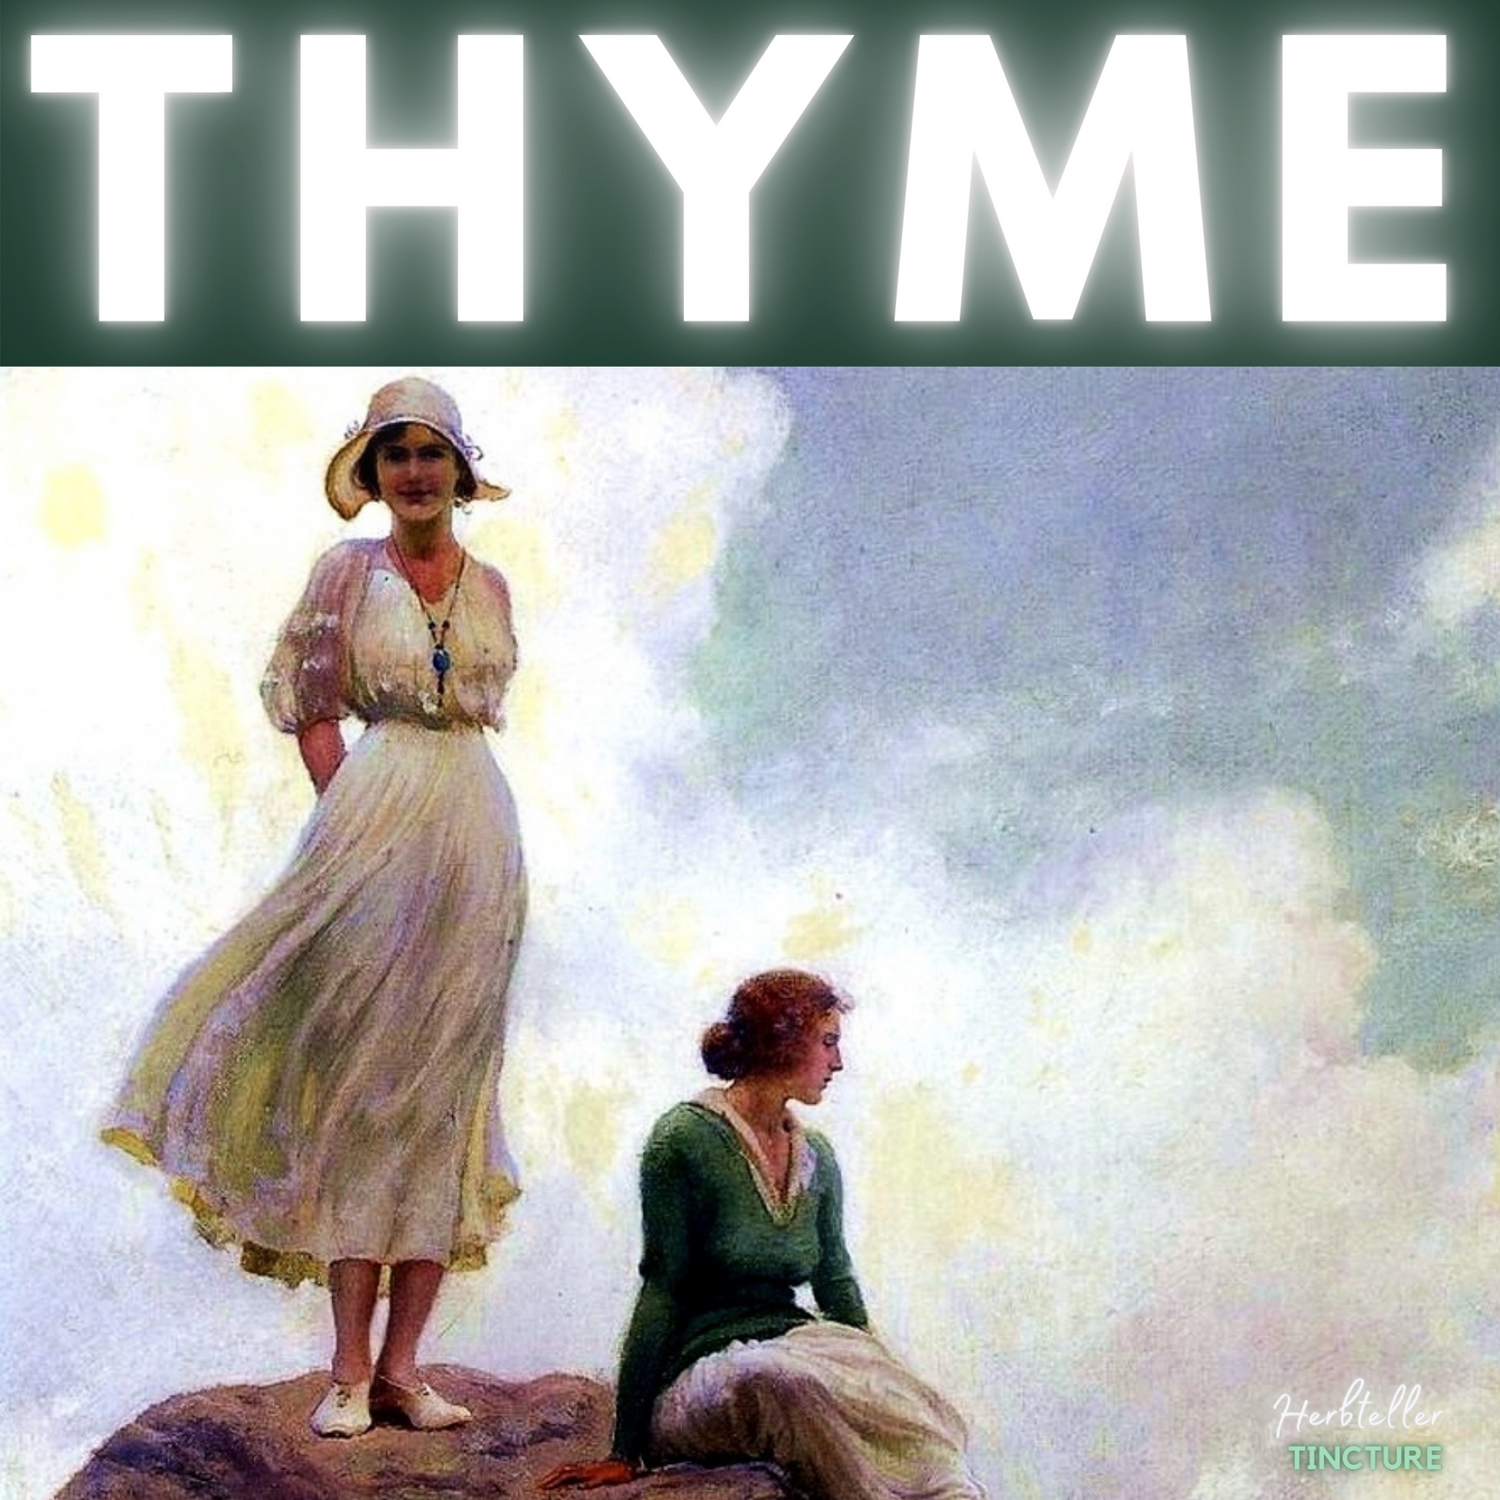 Thyme (Greek Courage) Herbal Tincture - Original City Apothecary